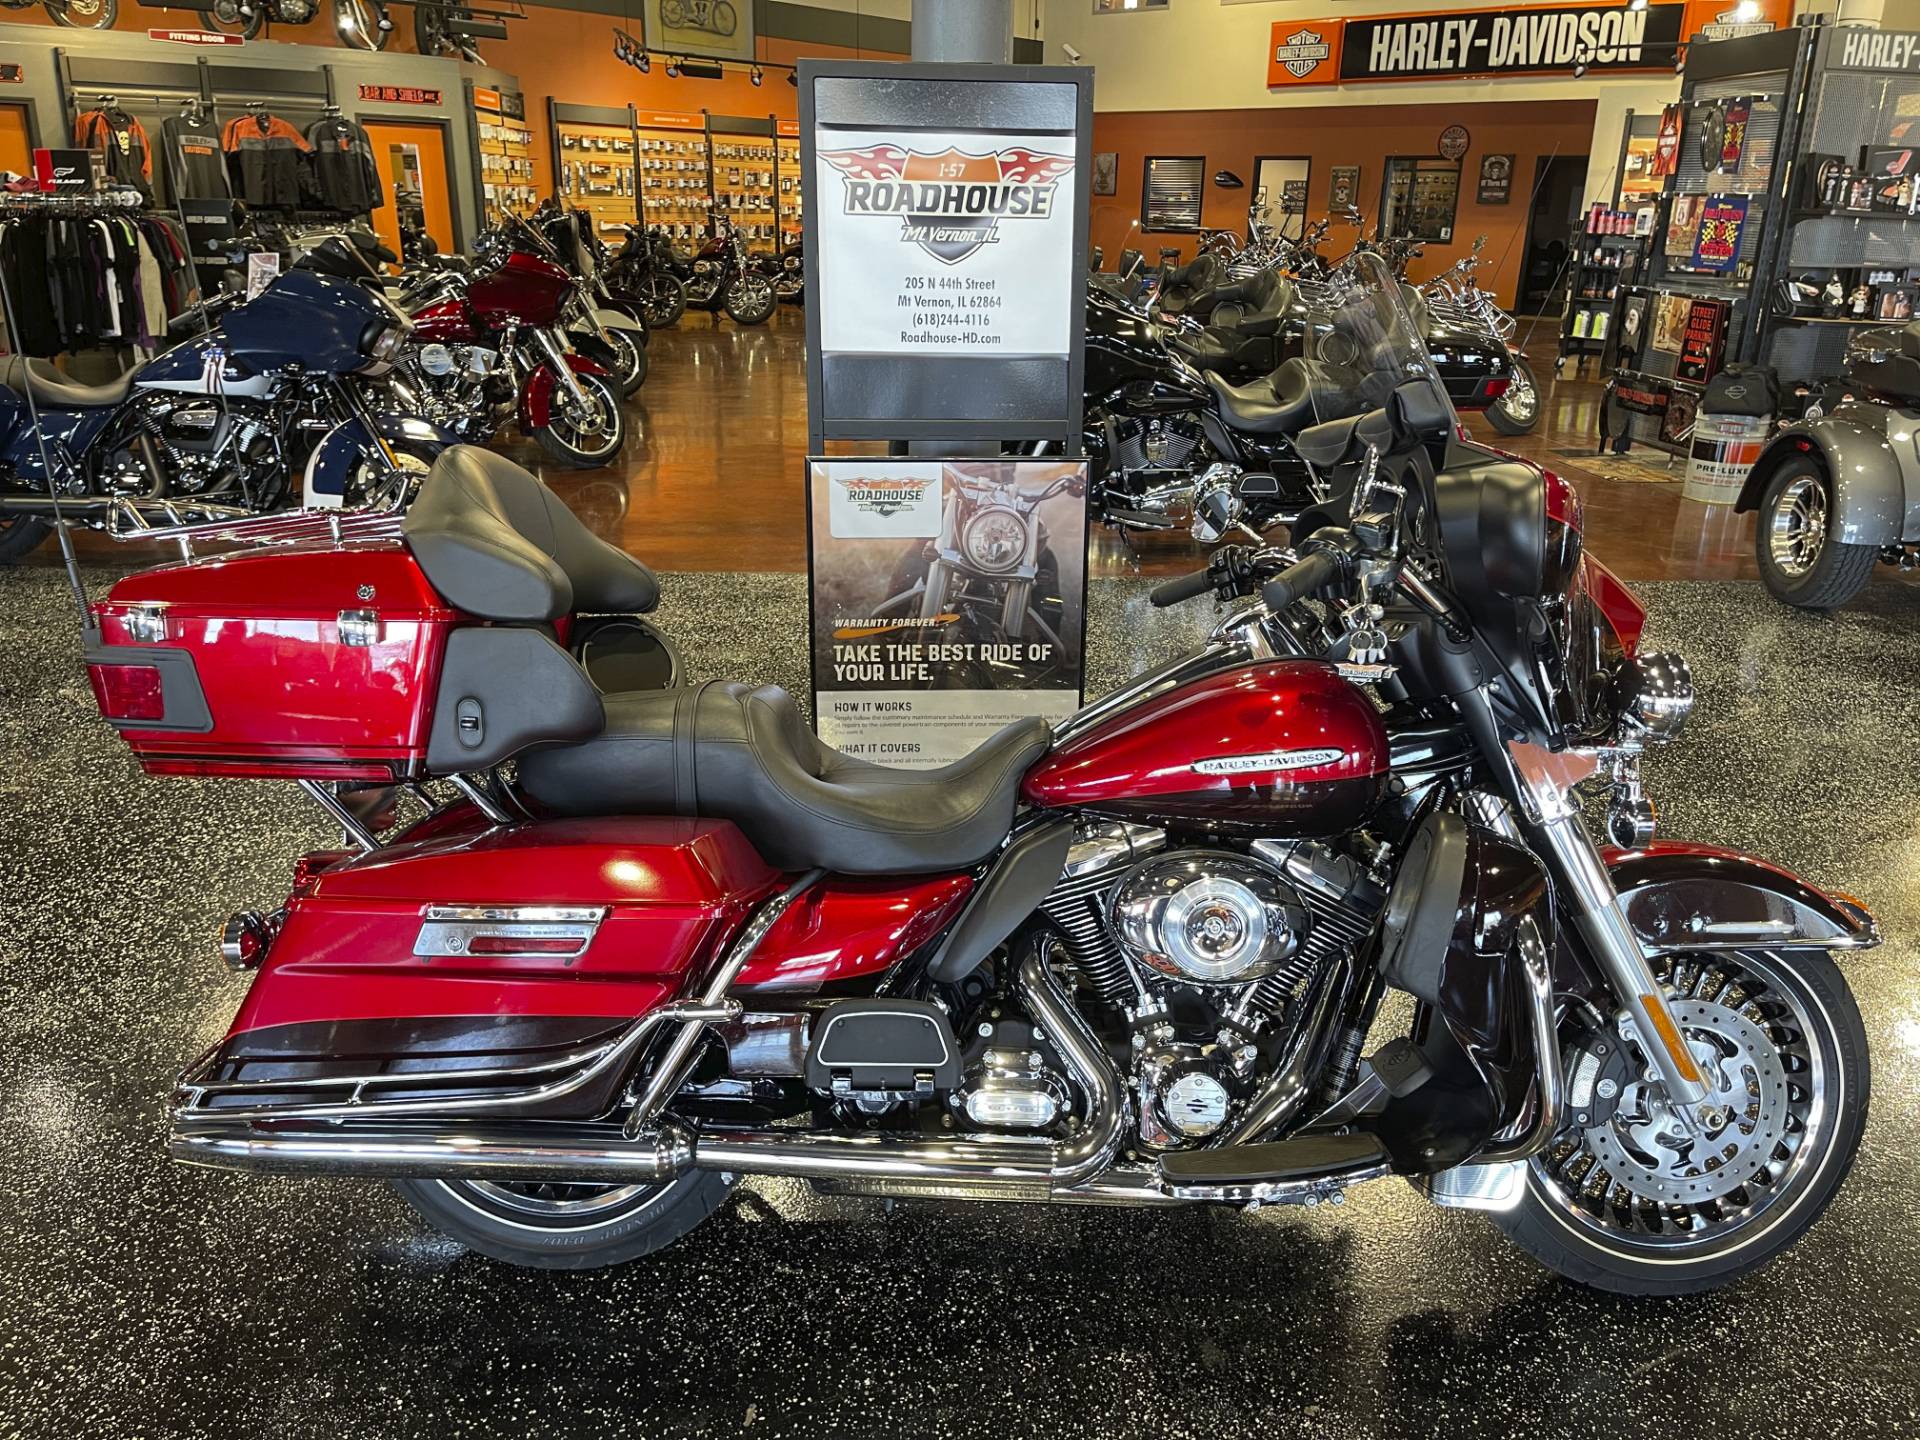 Used 2013 Harley Davidson Electra Glide Ultra Limited Ember Red Sunglo Merlot Motorcycles In Mount Vernon Il U650477